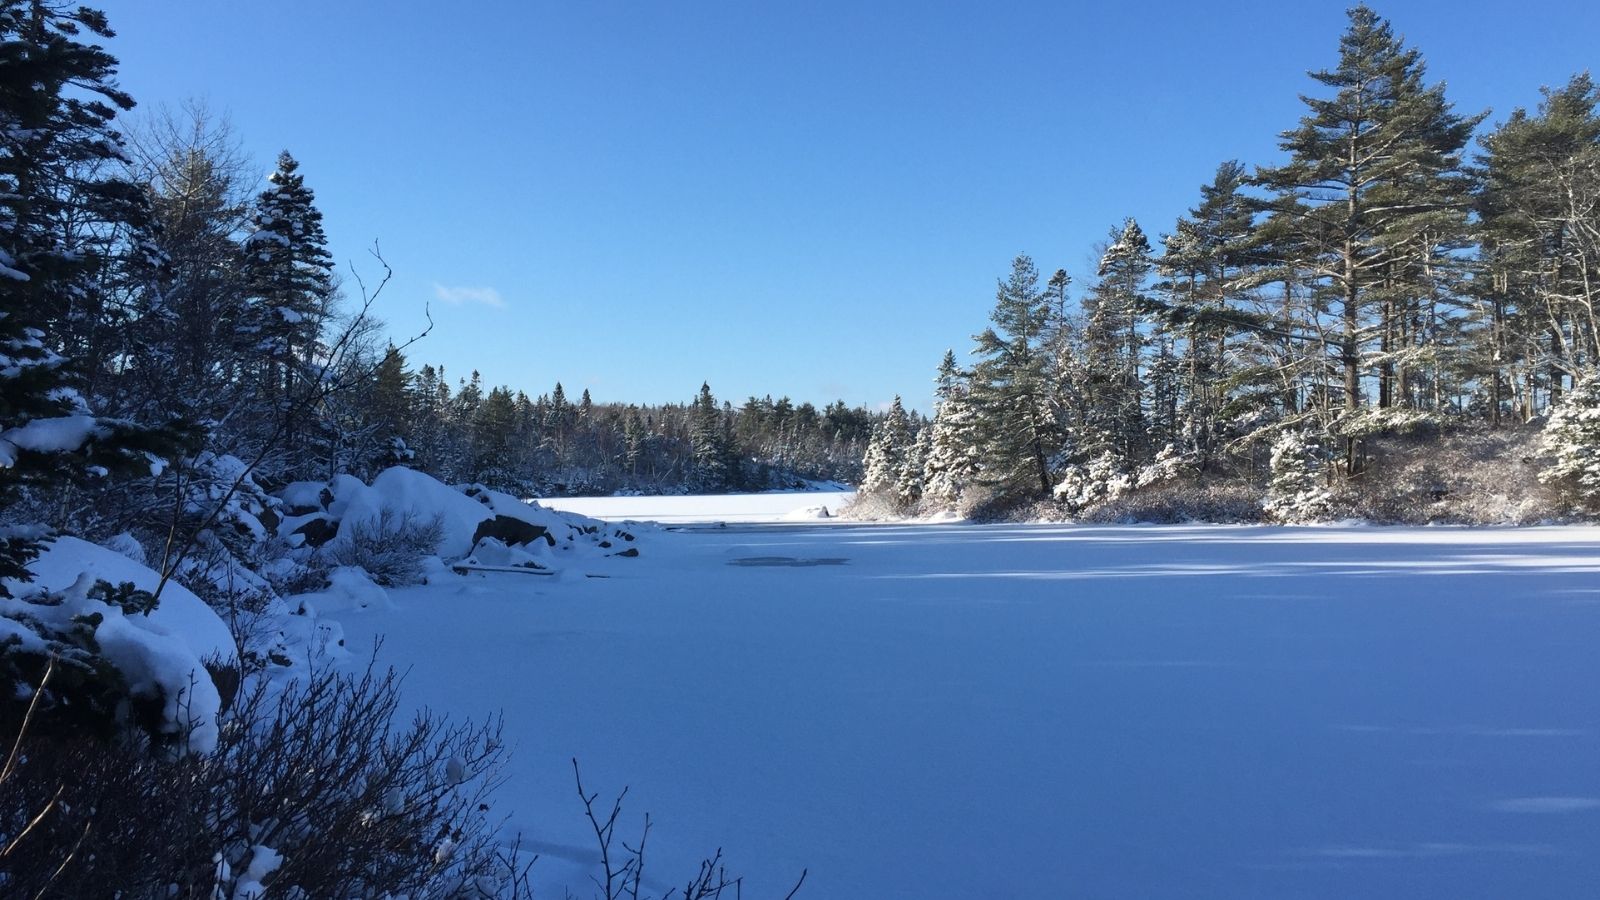 Blue sky above a frozen Suzie's lake surrounded by snow-covered trees